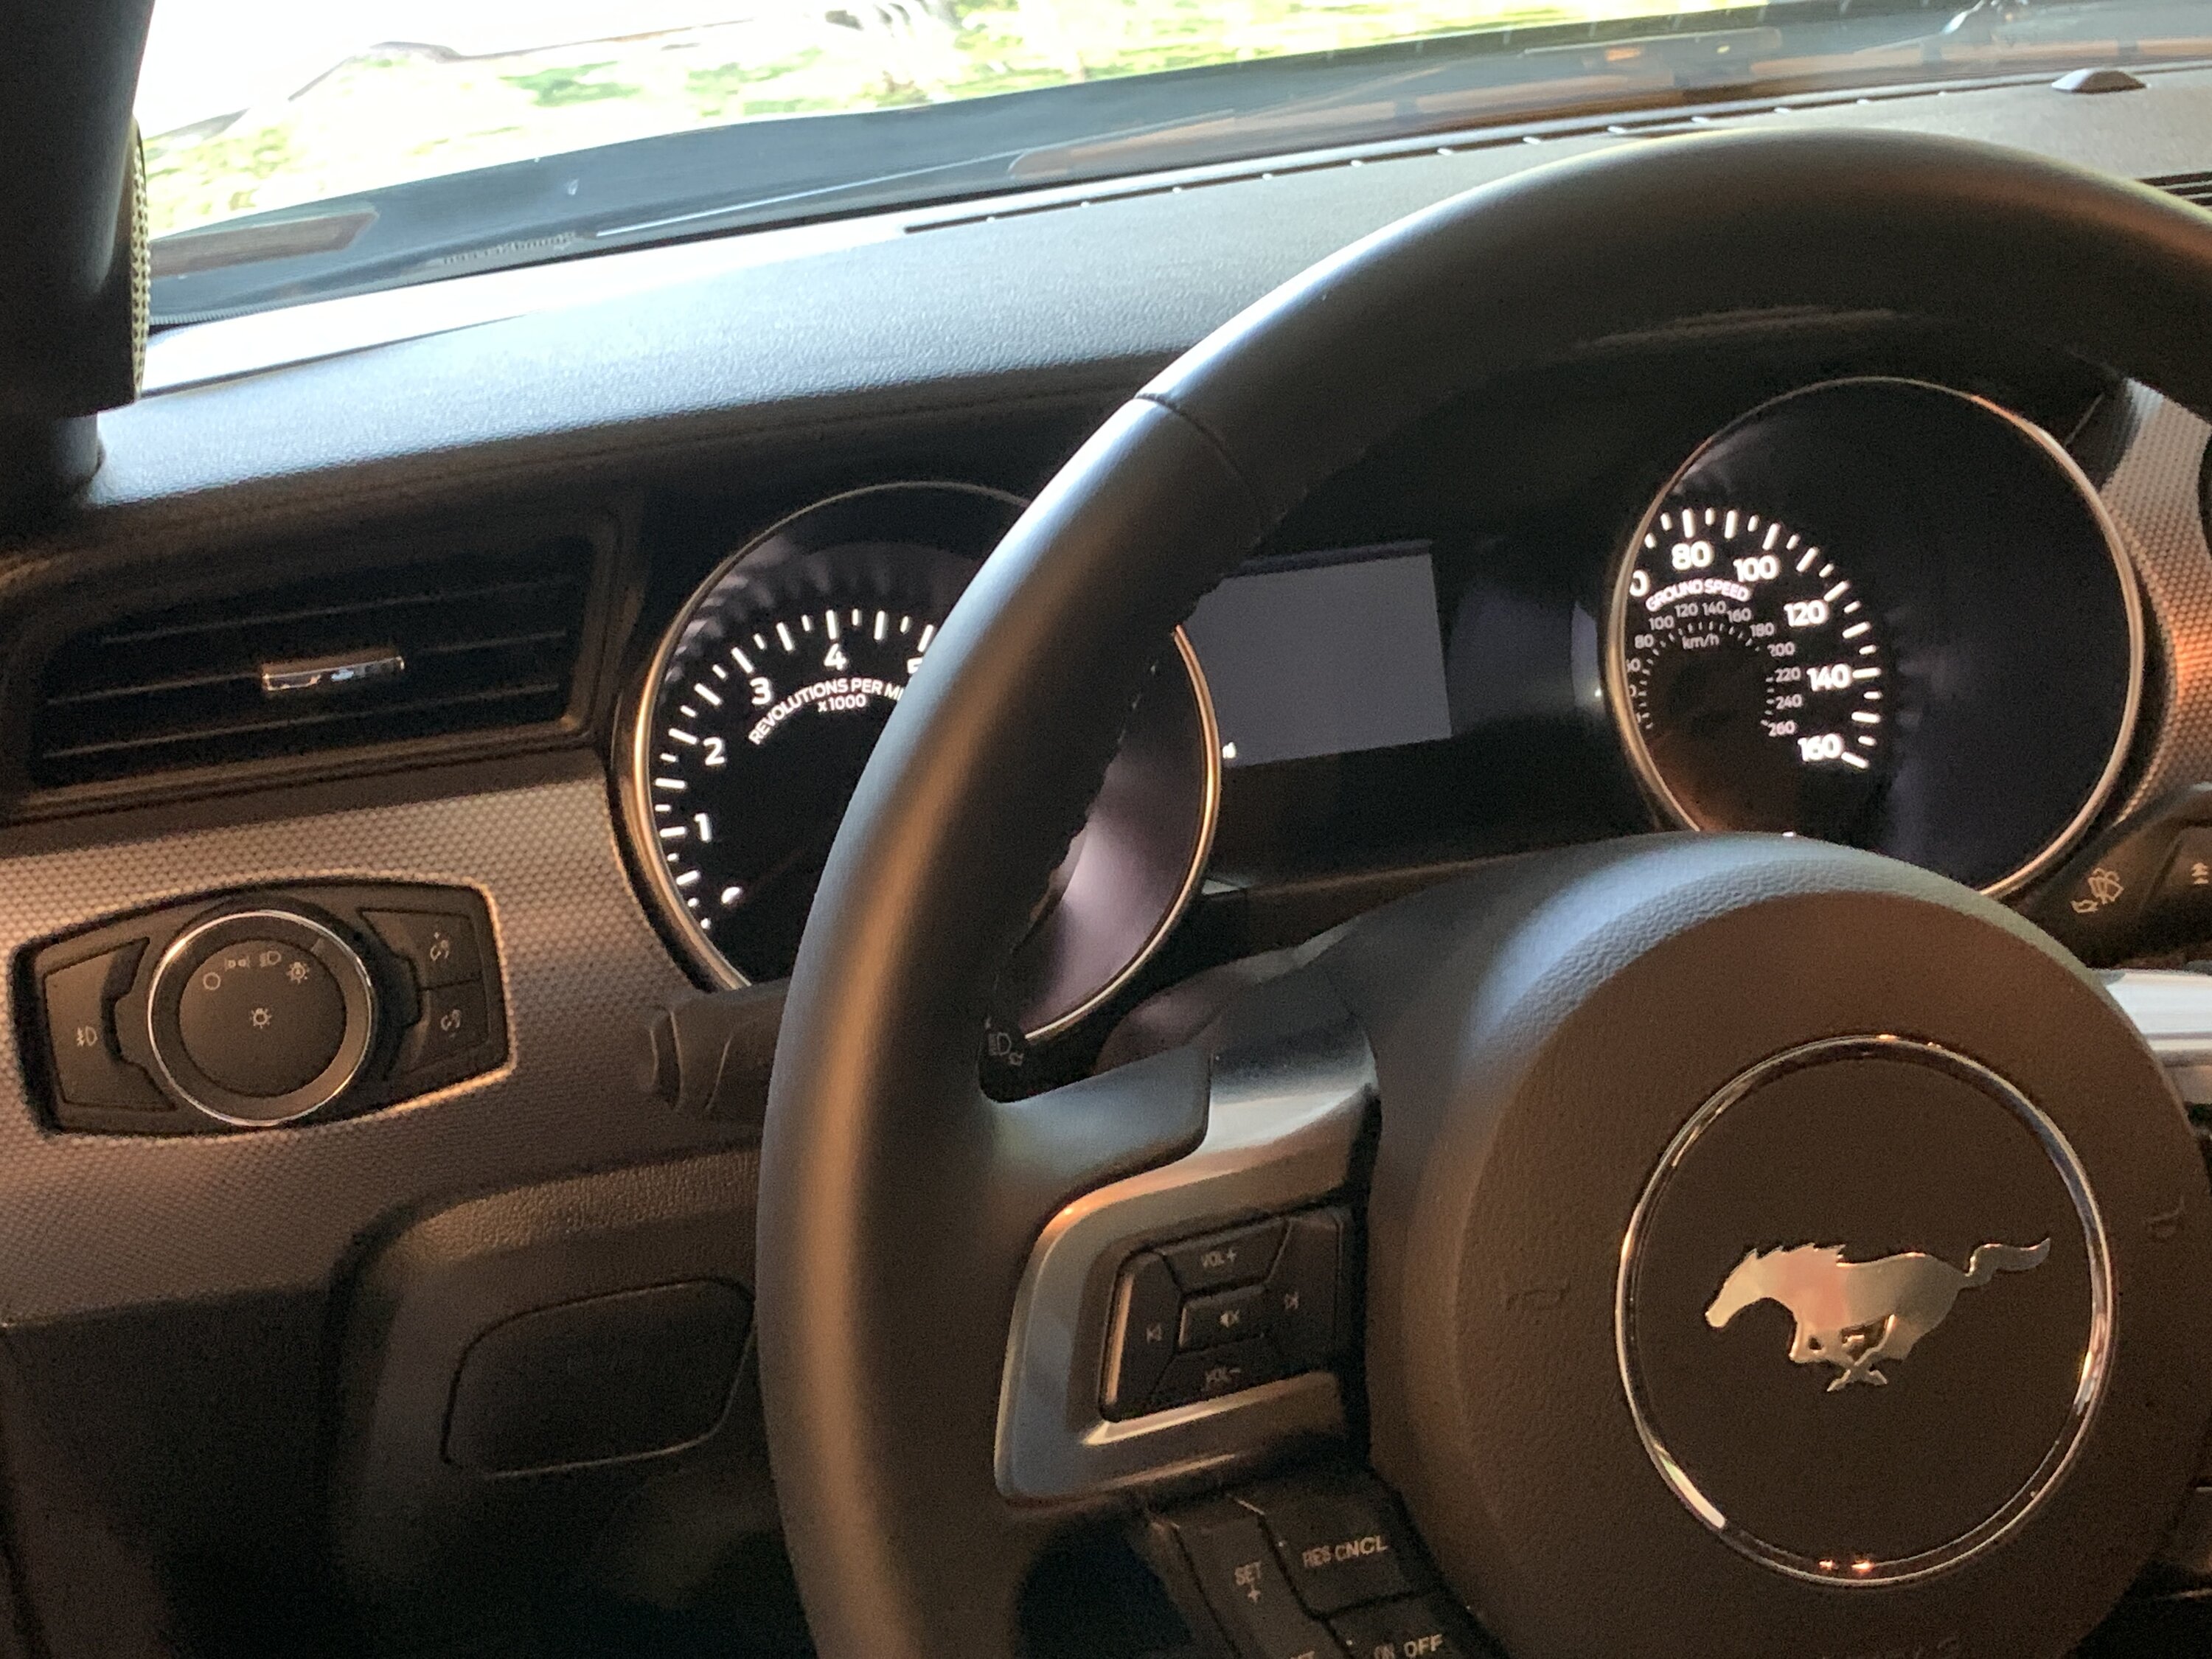 S650 Mustang The new dashboard is a big mistake IMO 13A6BC13-A96B-413E-BB76-62EBD884F4DF